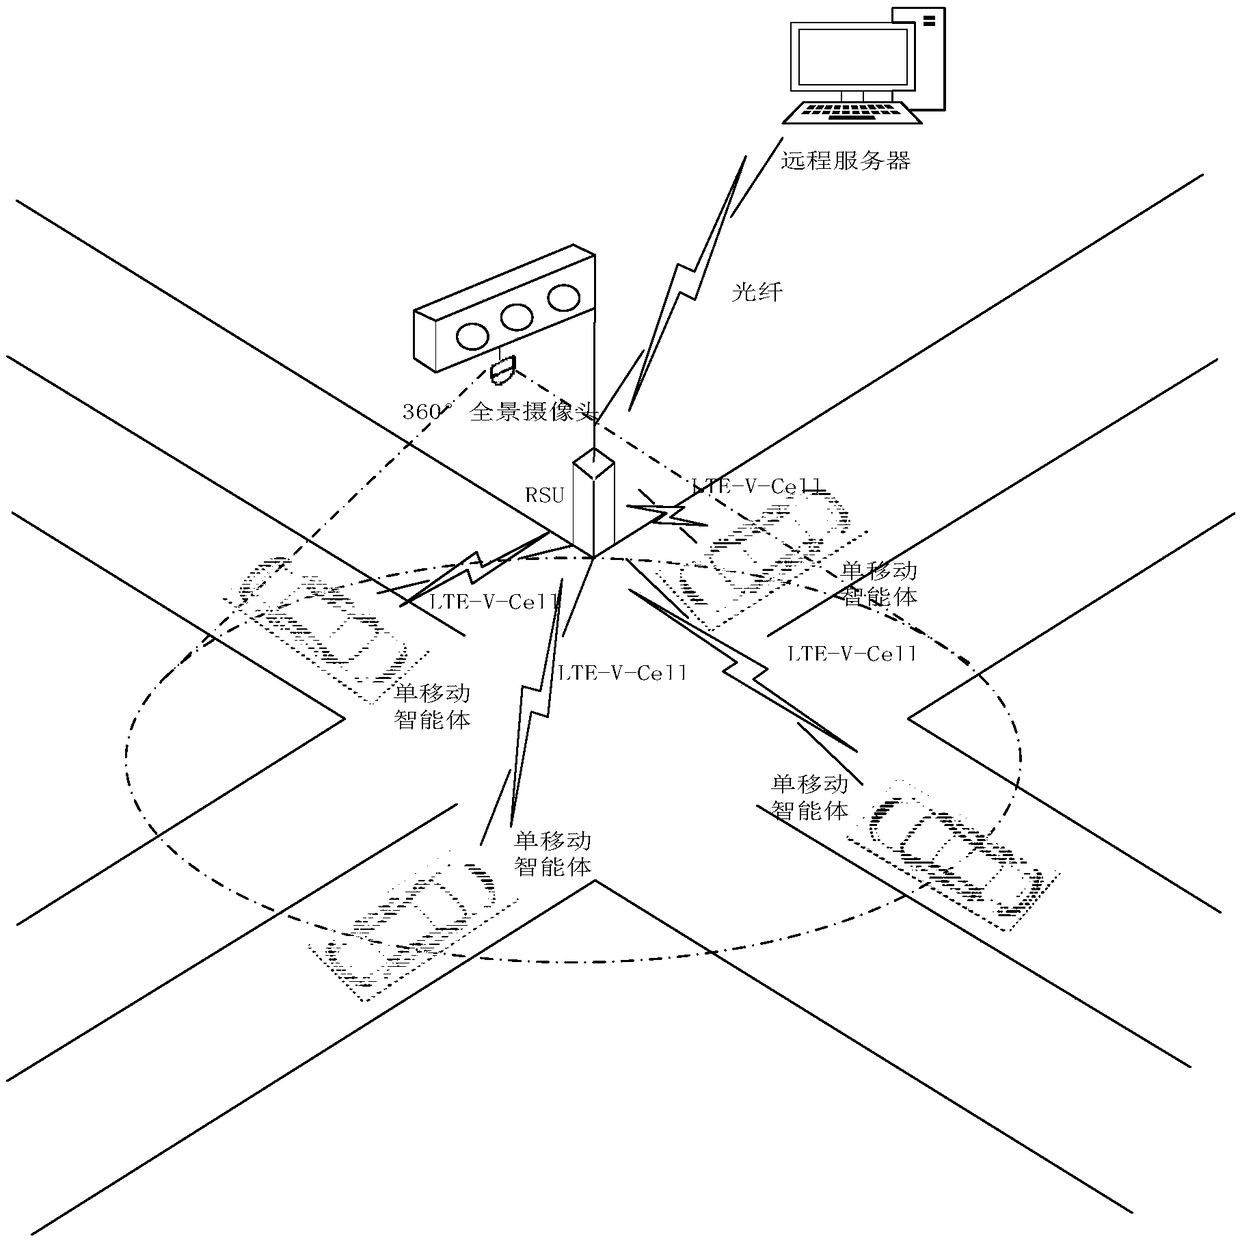 Image data sensing and co-processing system oriented to intelligent network vehicle scene